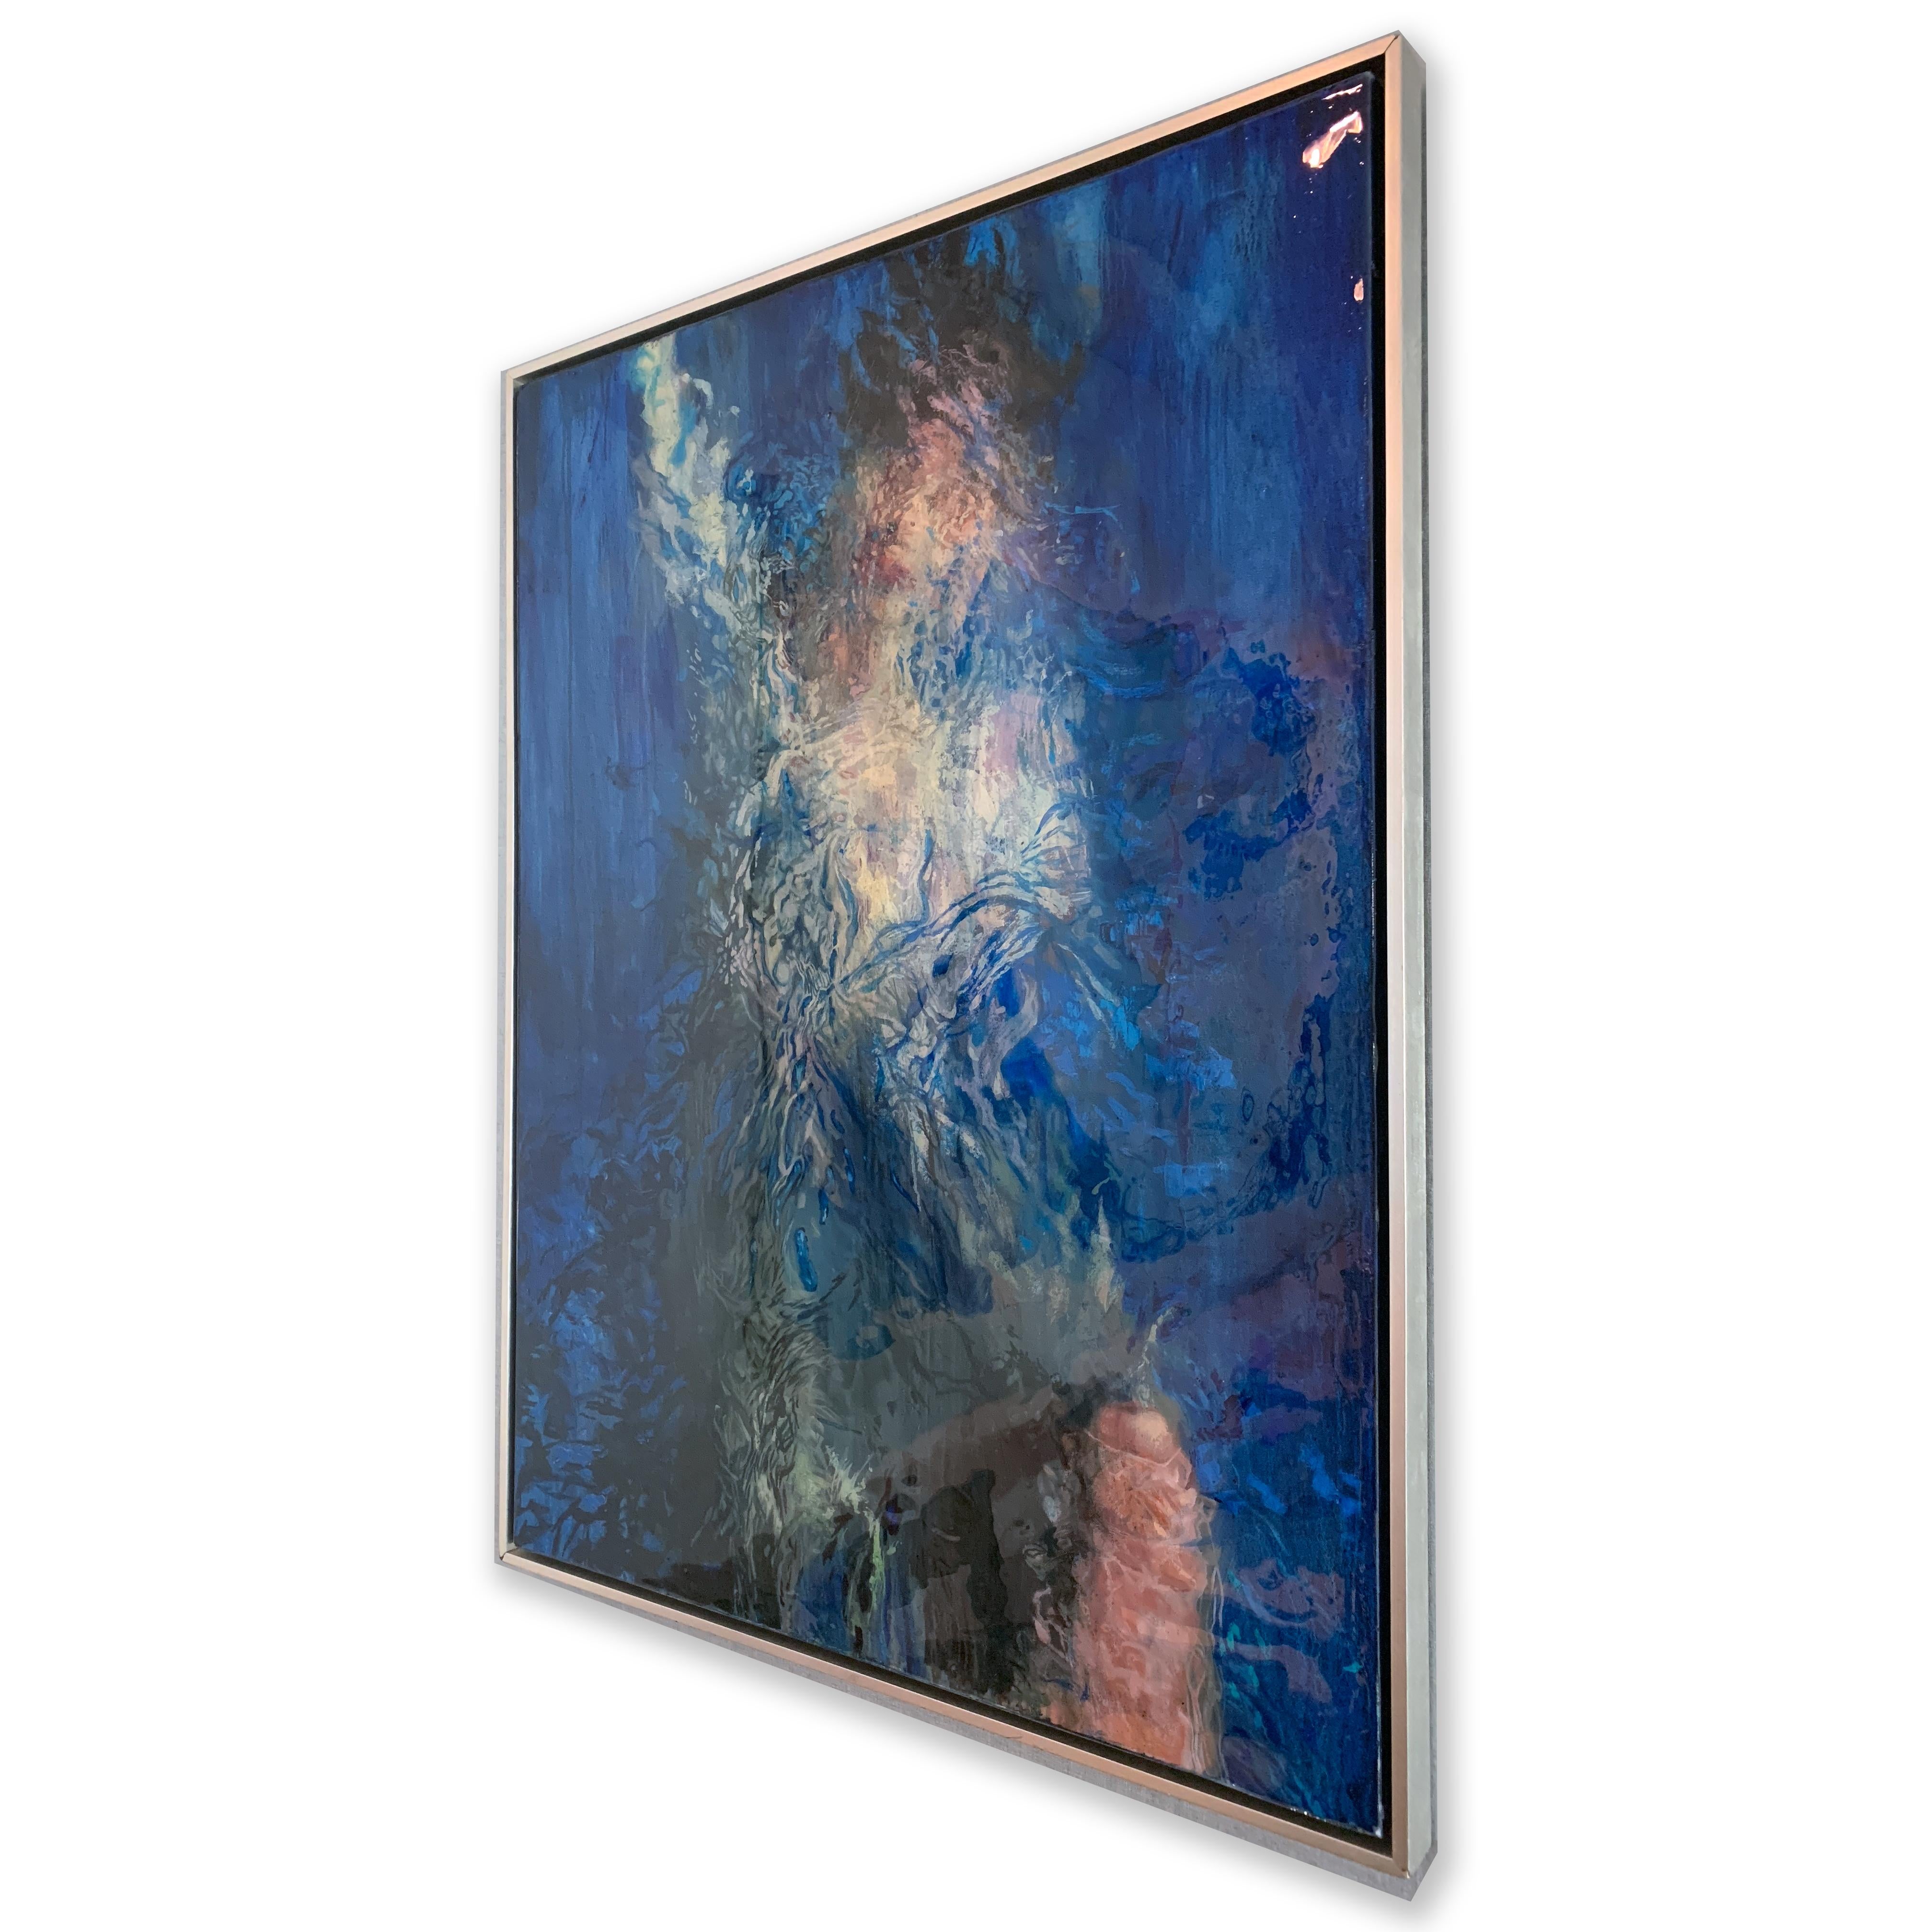 An original oil on canvas painting by American artist Hannah Vandermolen, framed in a silver floating frame and covered in a glossy resin. The stunning, deep blues surrounding the central figure allow the figure to emerge from the depths into the